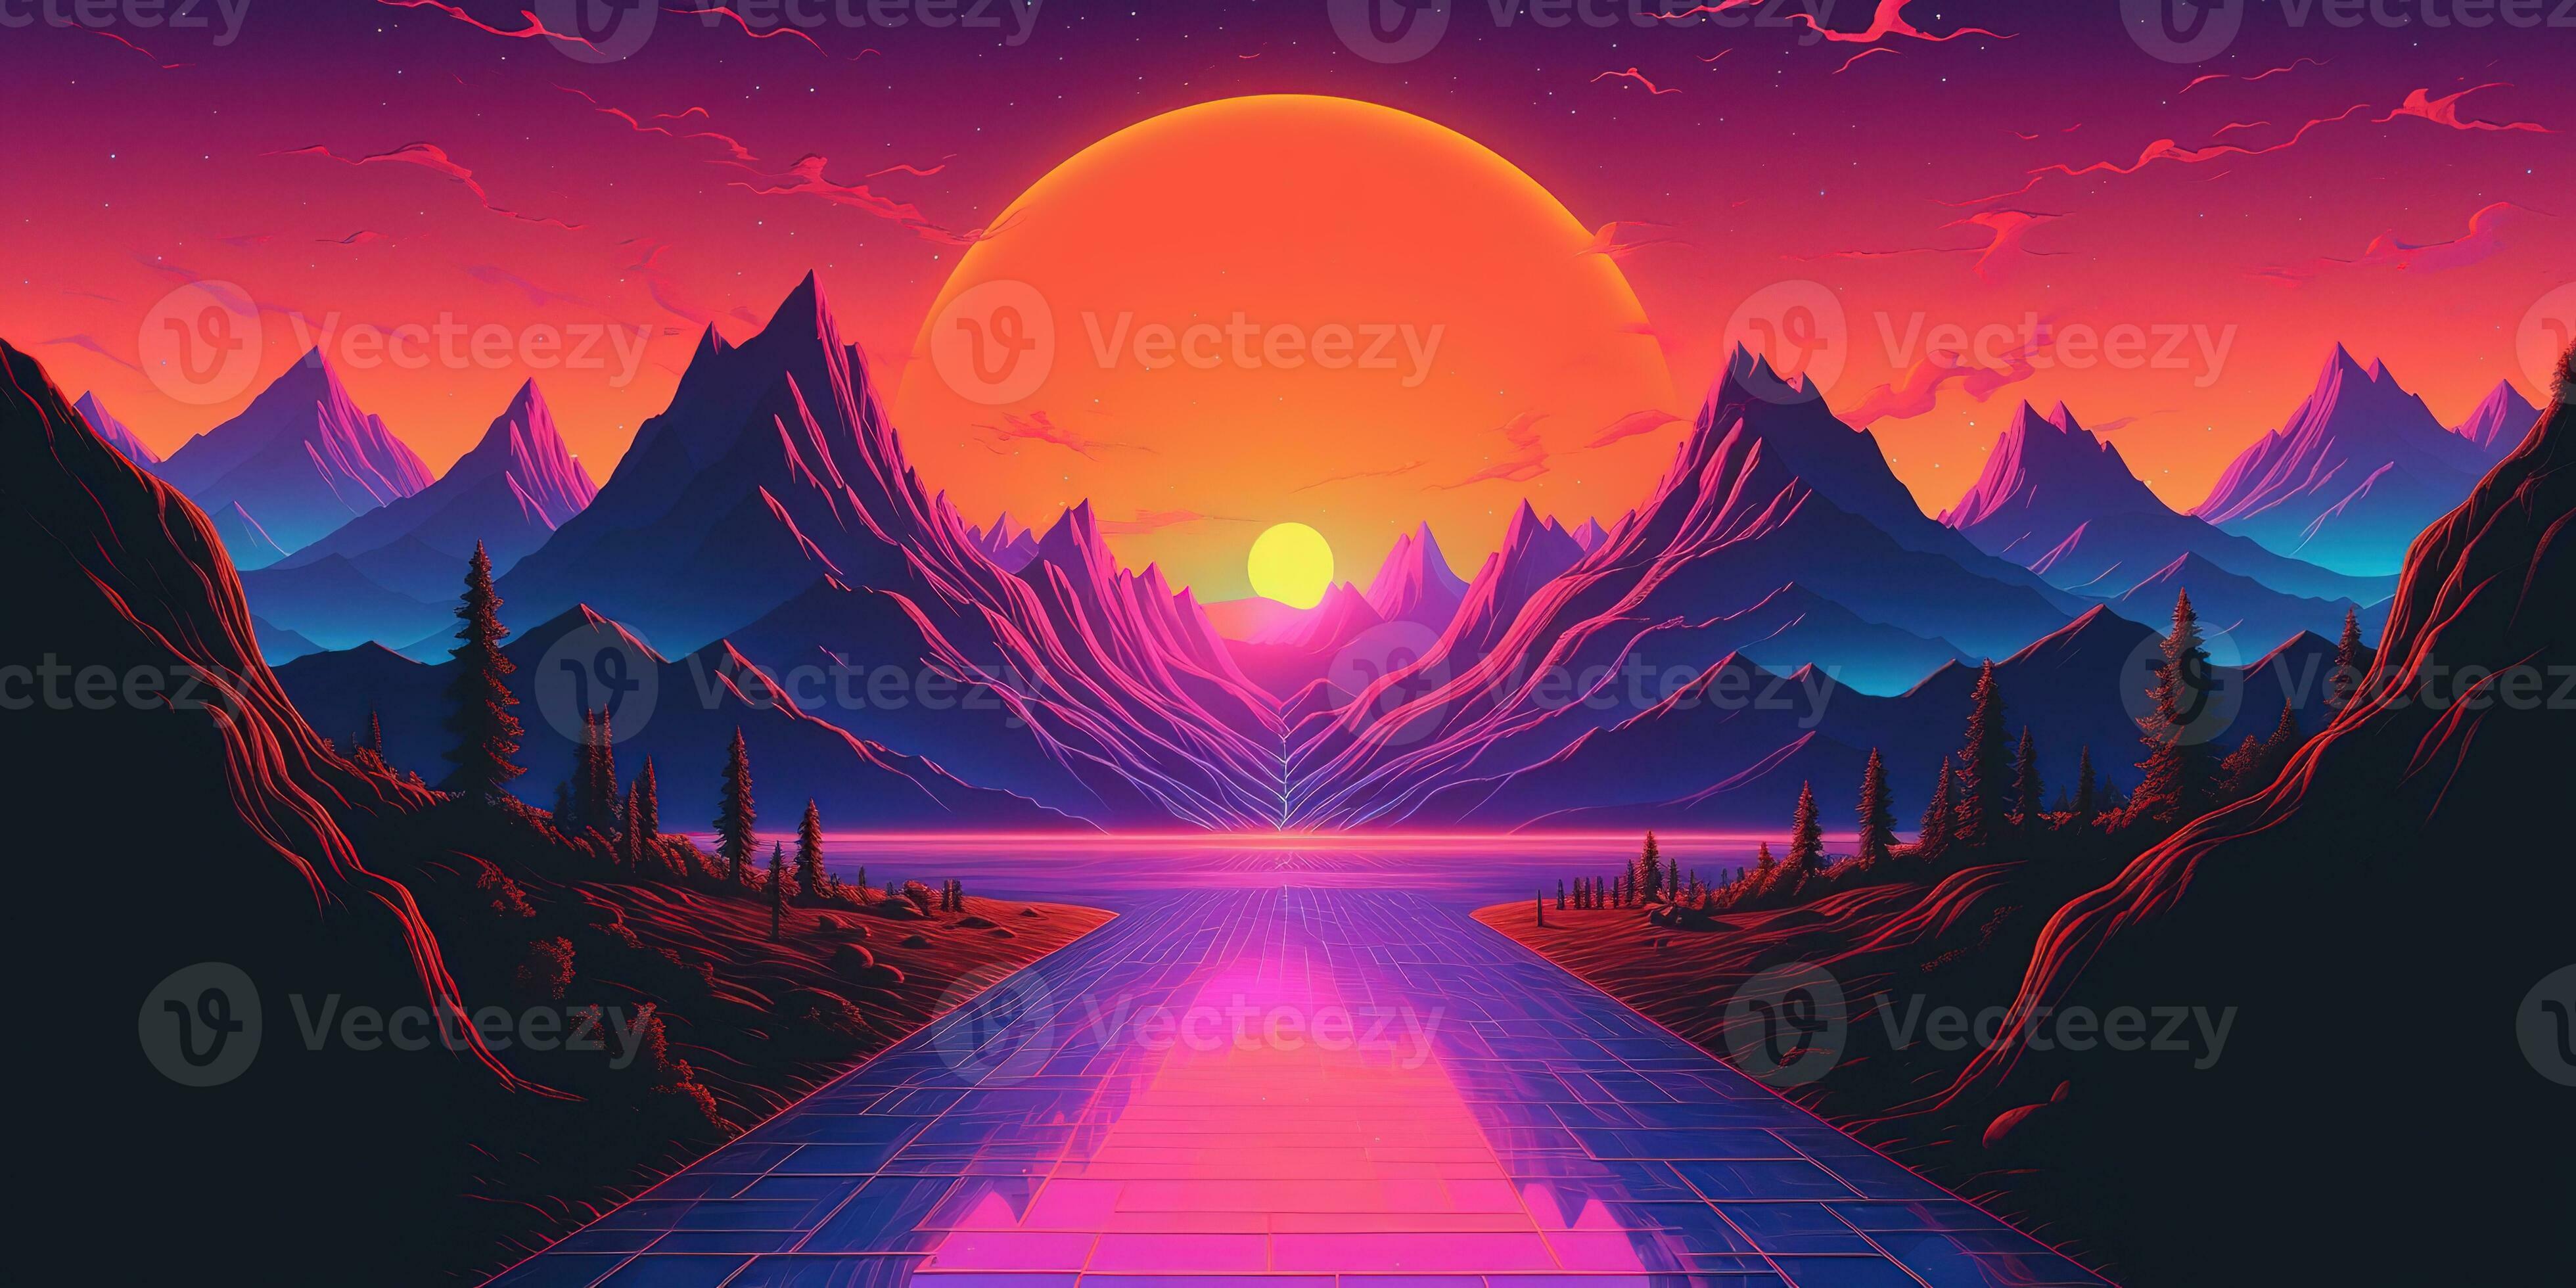 Aesthetic mountain synthwave retrowave wallpaper with a cool and vibrant neon design